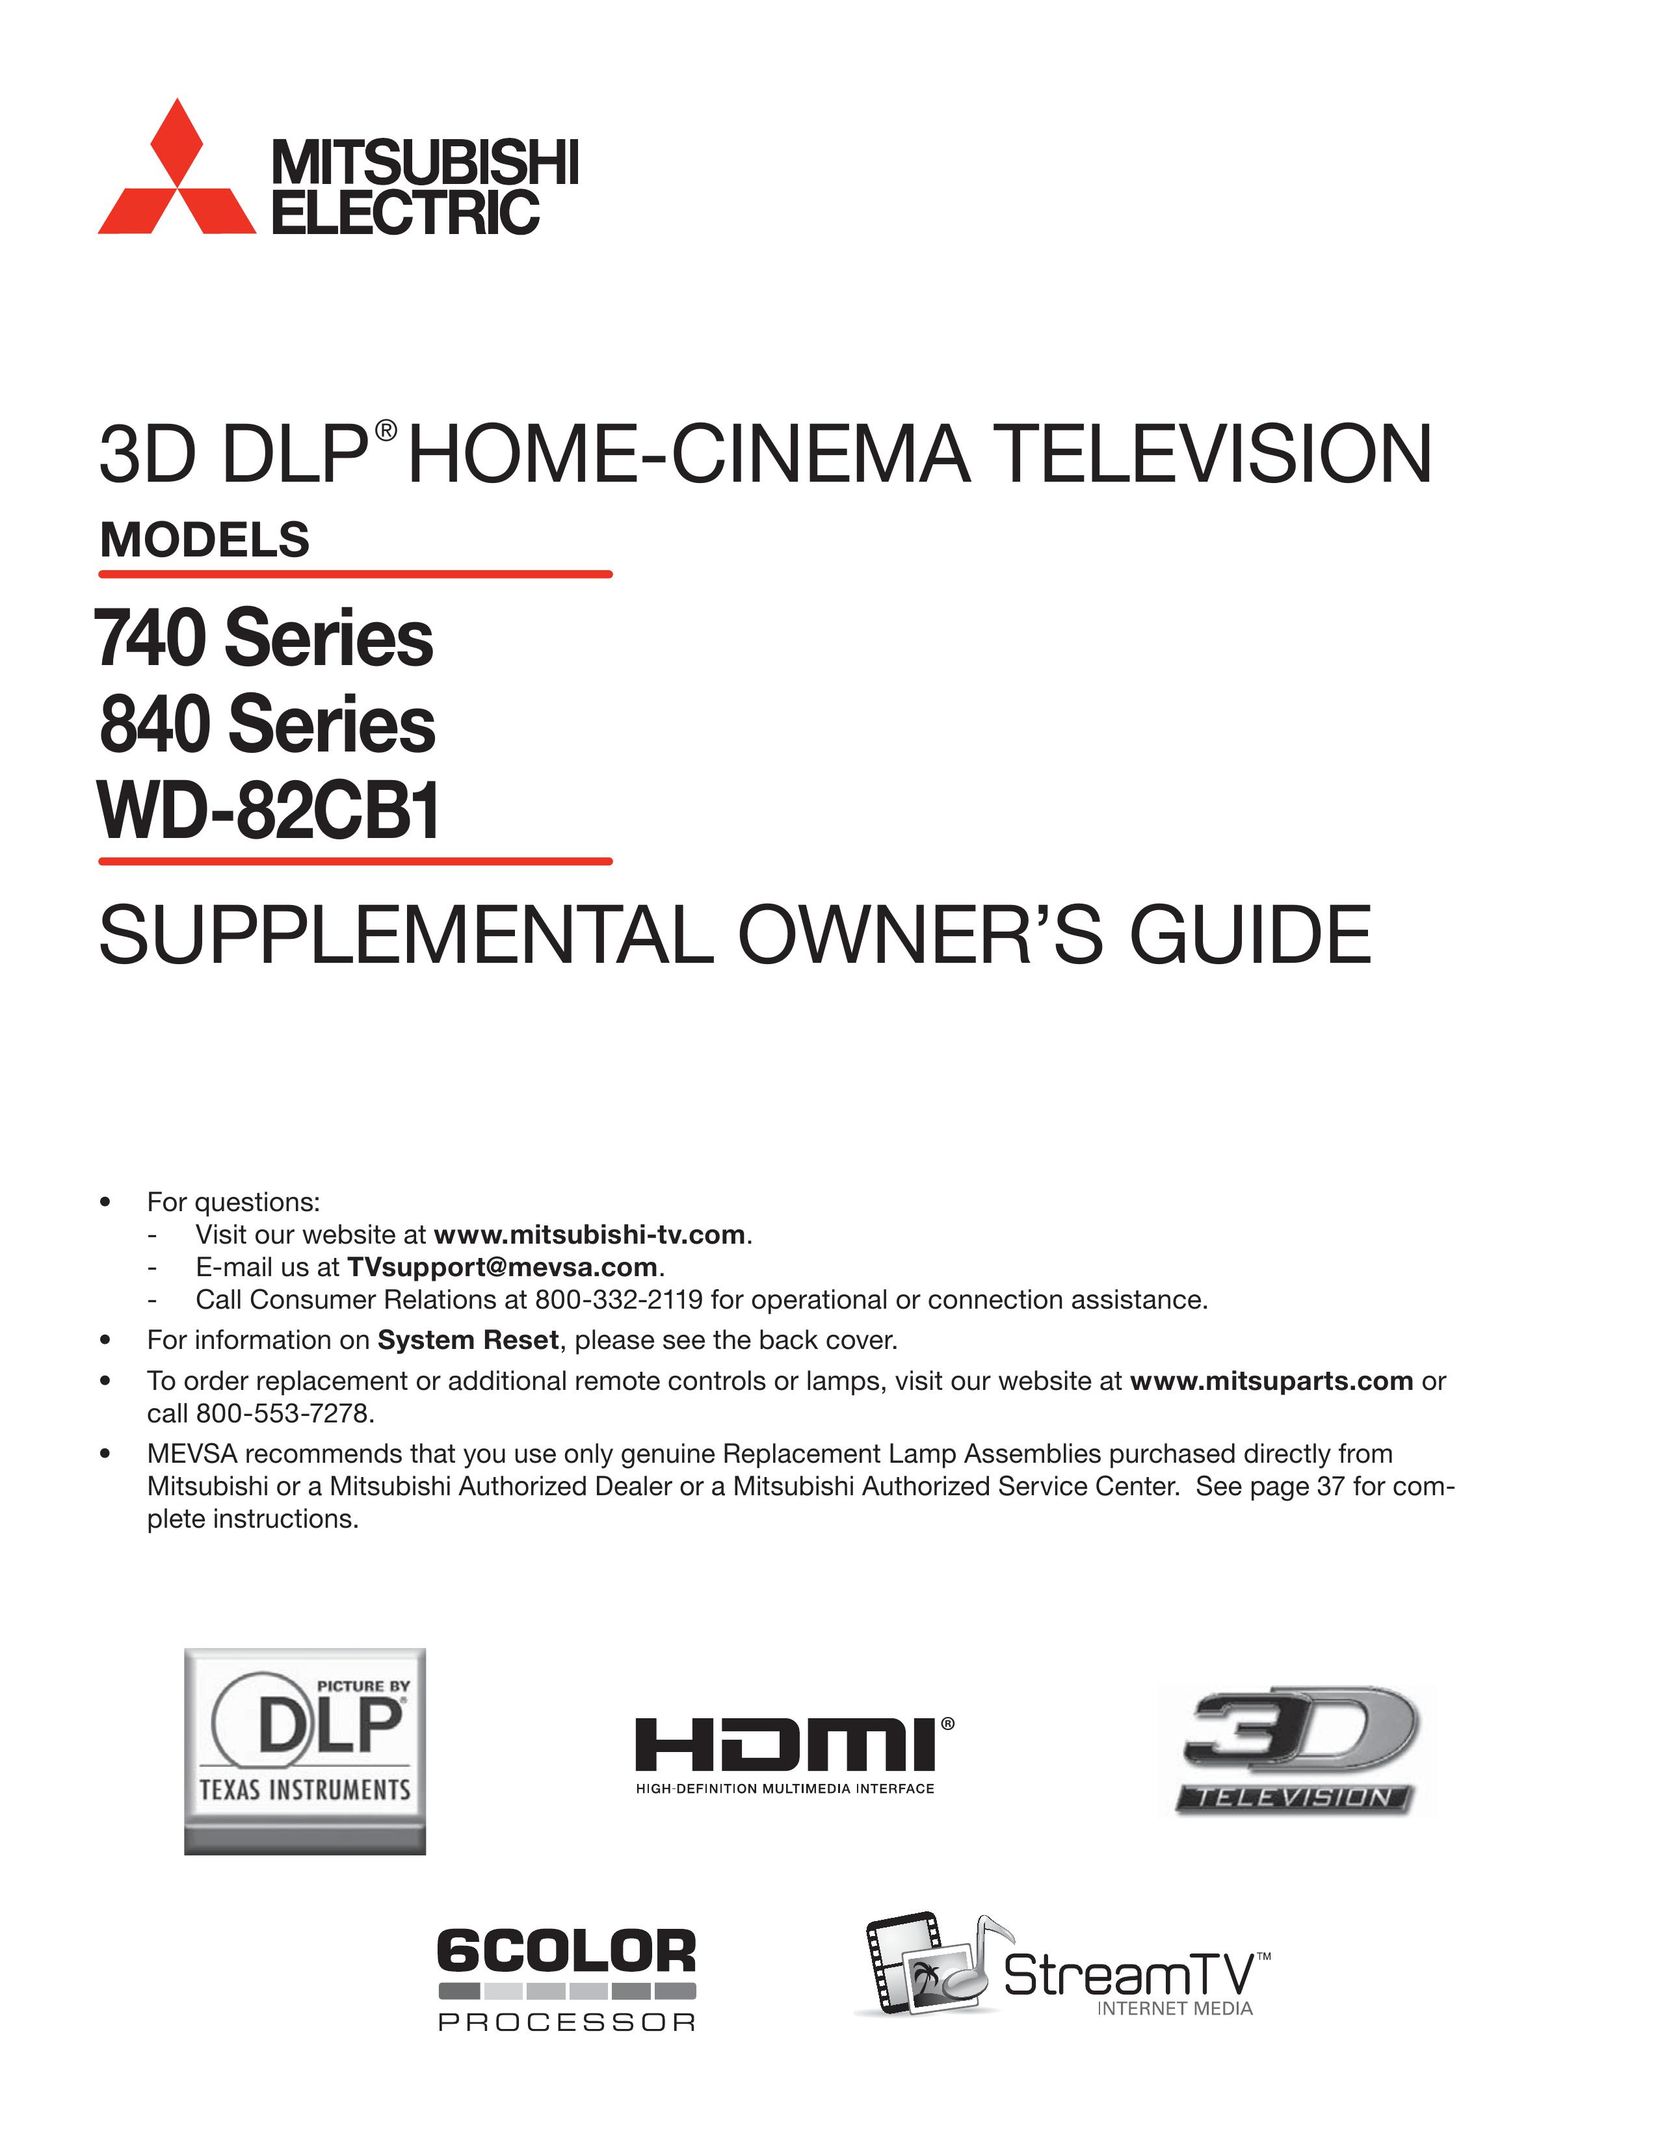 Mitsubishi Electronics WD-82CB1 Home Theater System User Manual